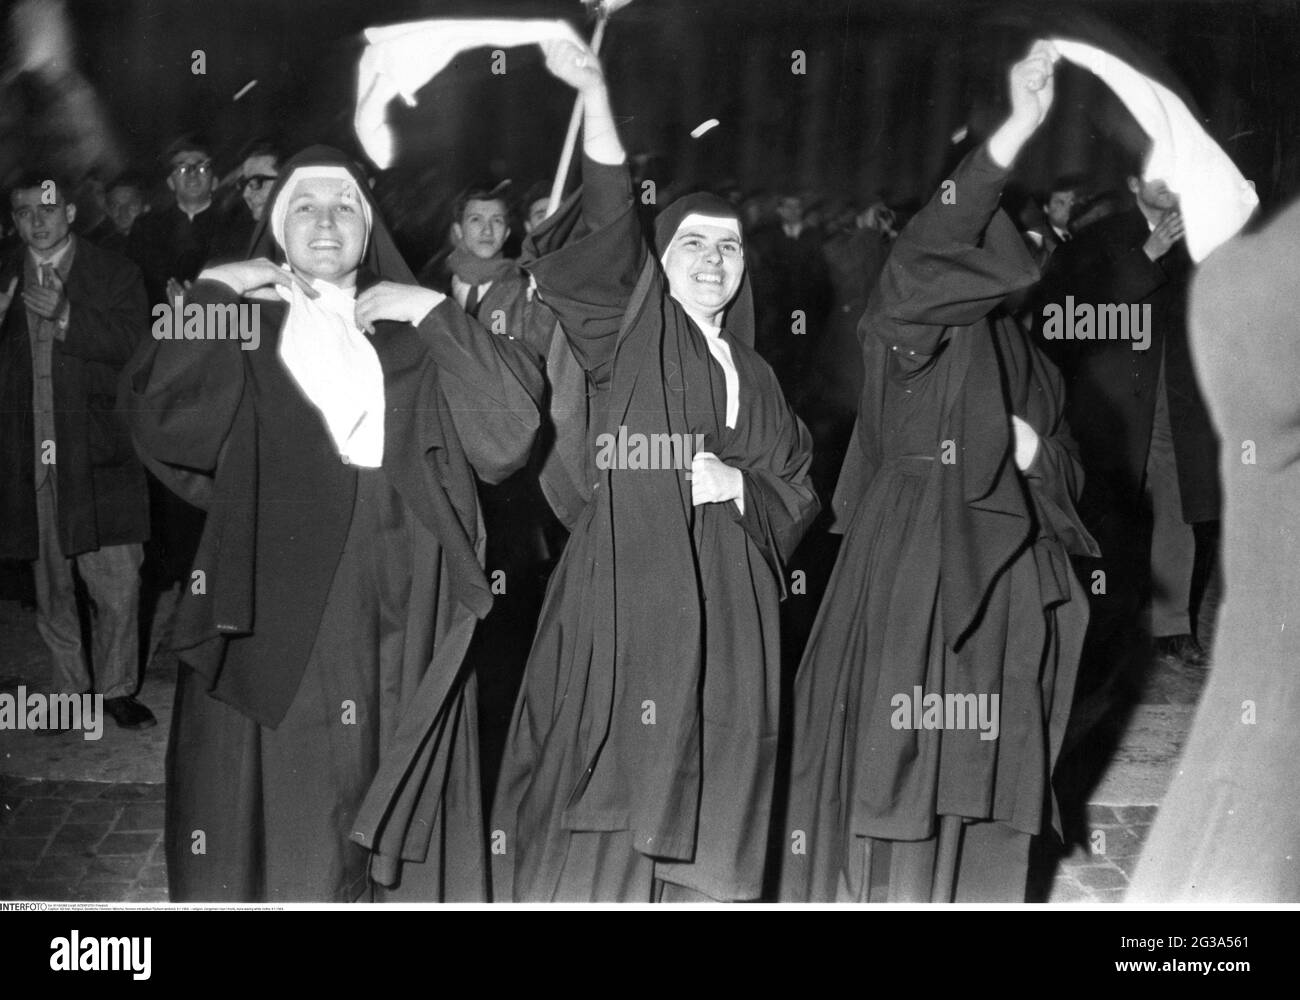 religion, clergyman / nun / monk, nuns waving white cloths, 9.1.1964, ADDITIONAL-RIGHTS-CLEARANCE-INFO-NOT-AVAILABLE Stock Photo